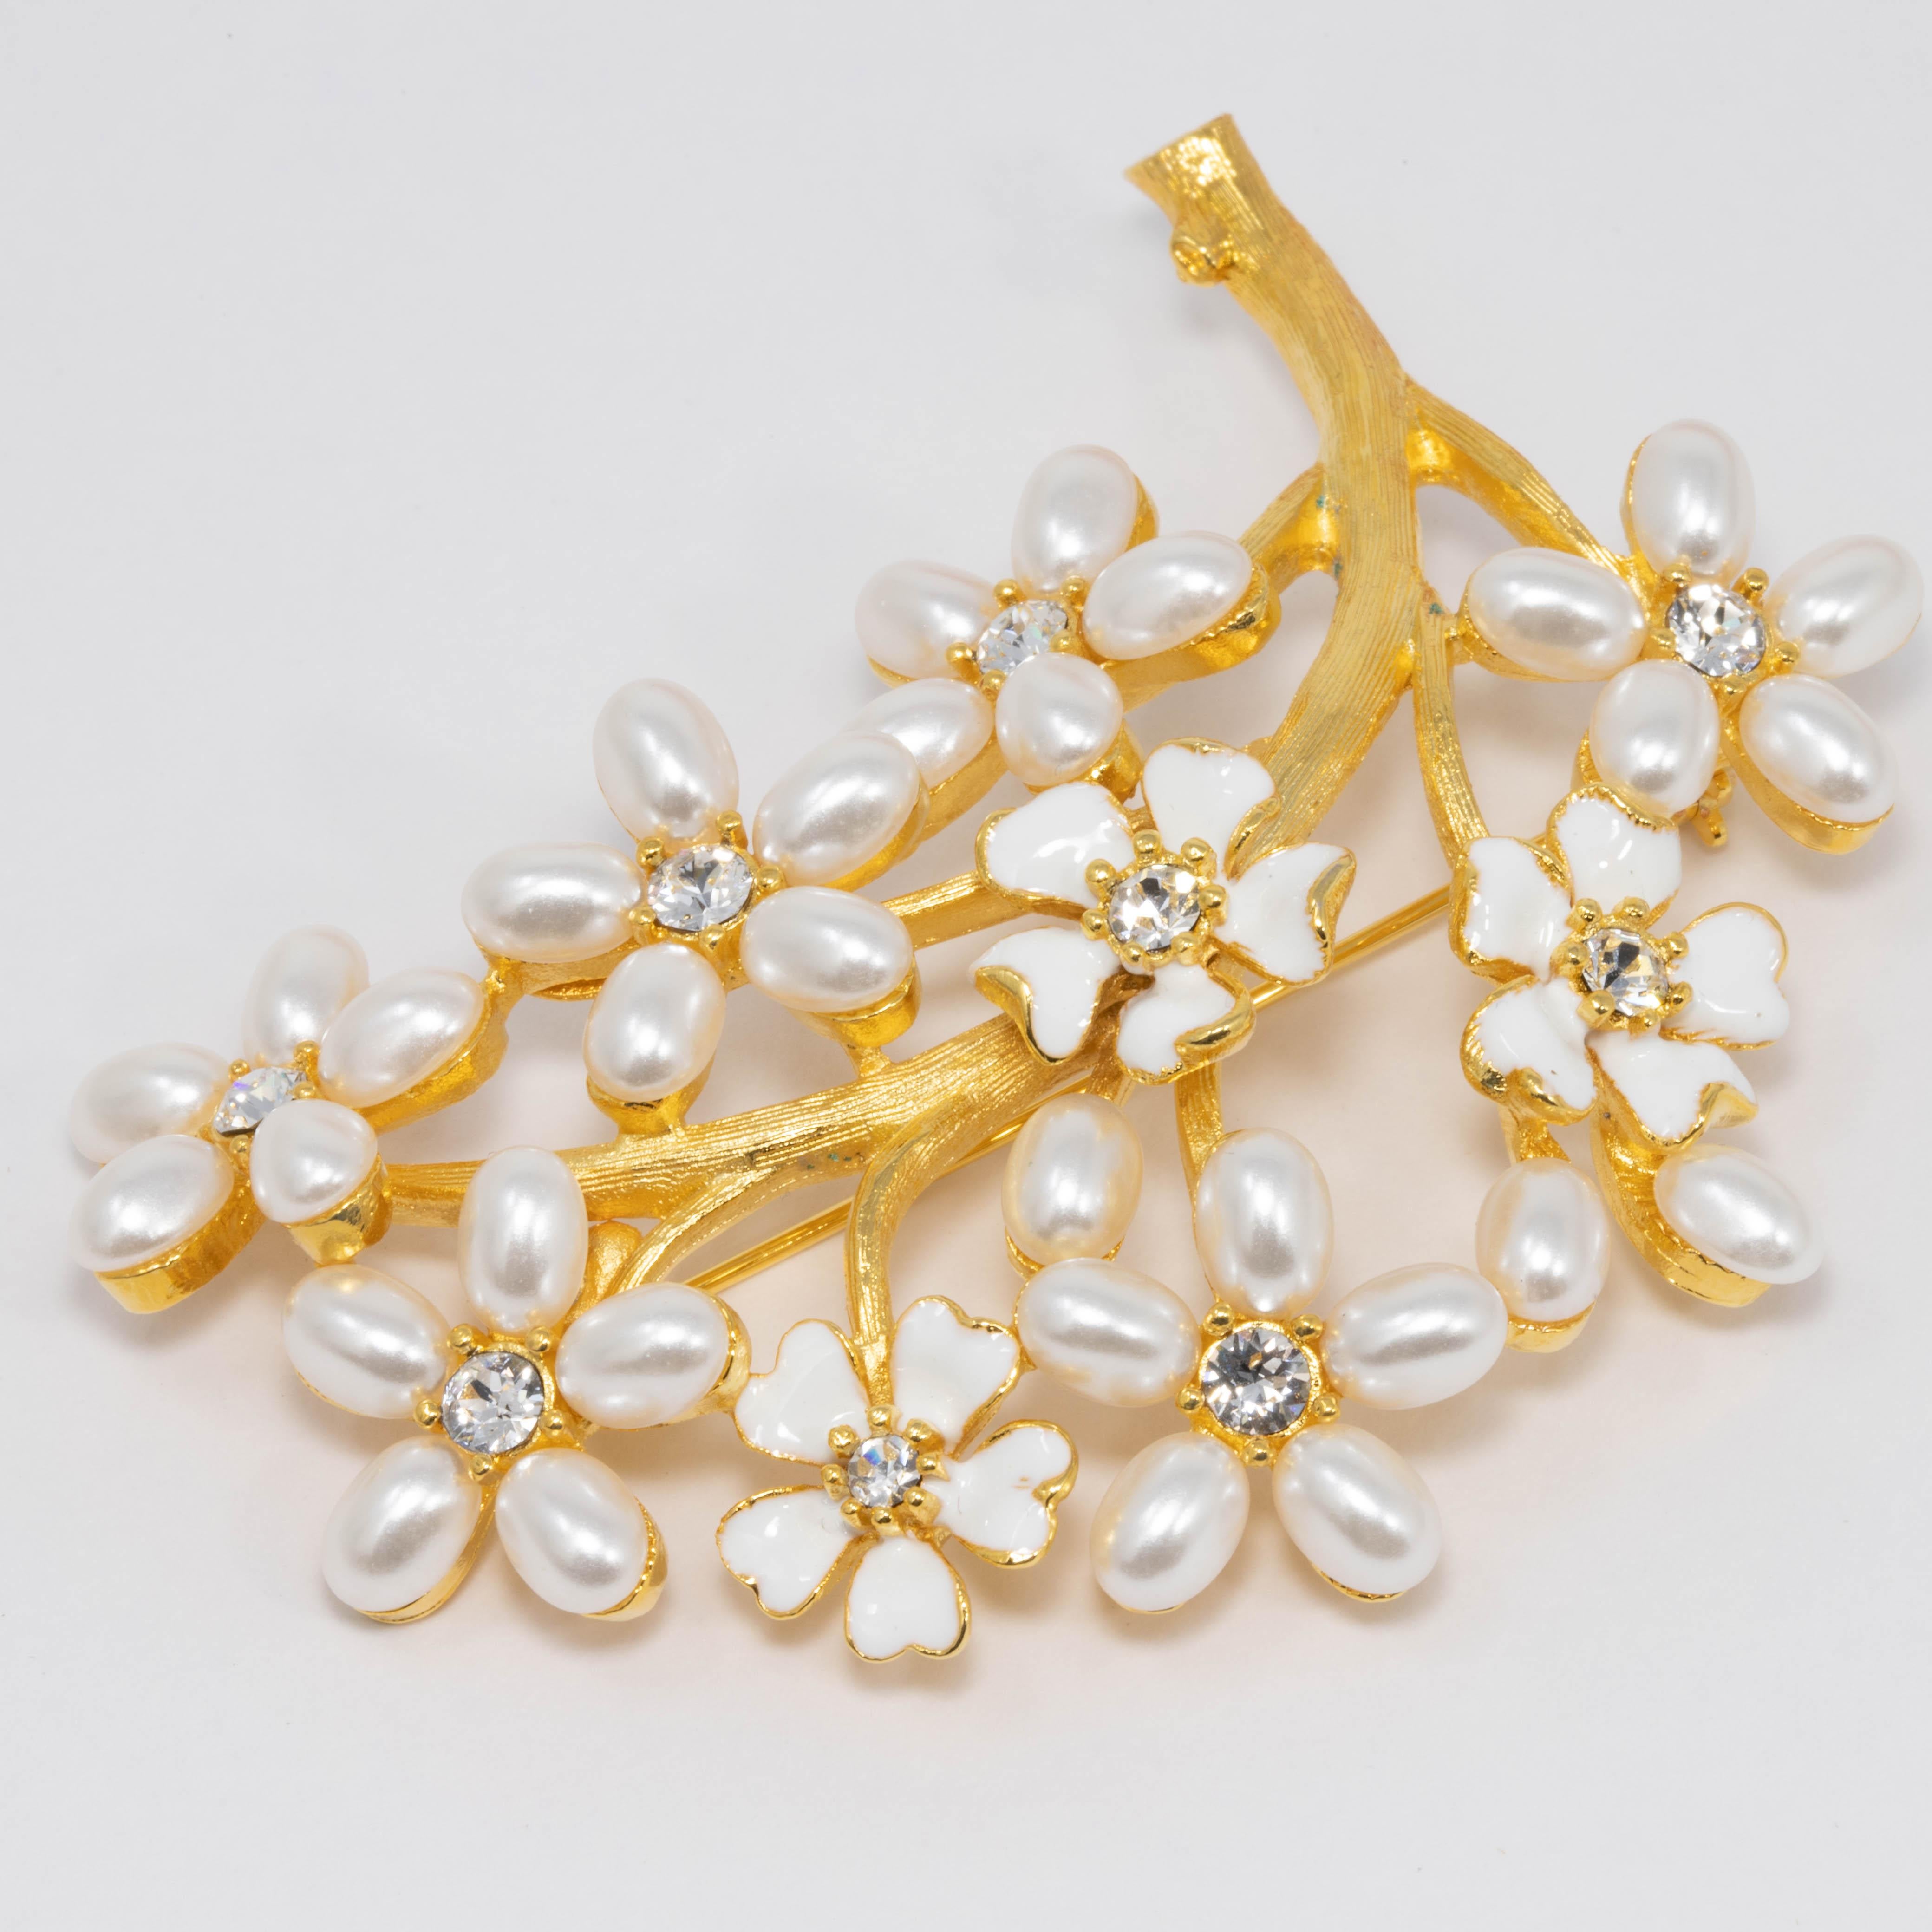 Elegance embodied in a gorgeous Kenneth Jay Lane pin brooch! Features golden branches, along with white flowers, with faux pearl and enamel petals, and sparkling crystal centers.

Gold-plated.

Tags, Marks, Hallmarks: Kenneth © Lane, Made in USA